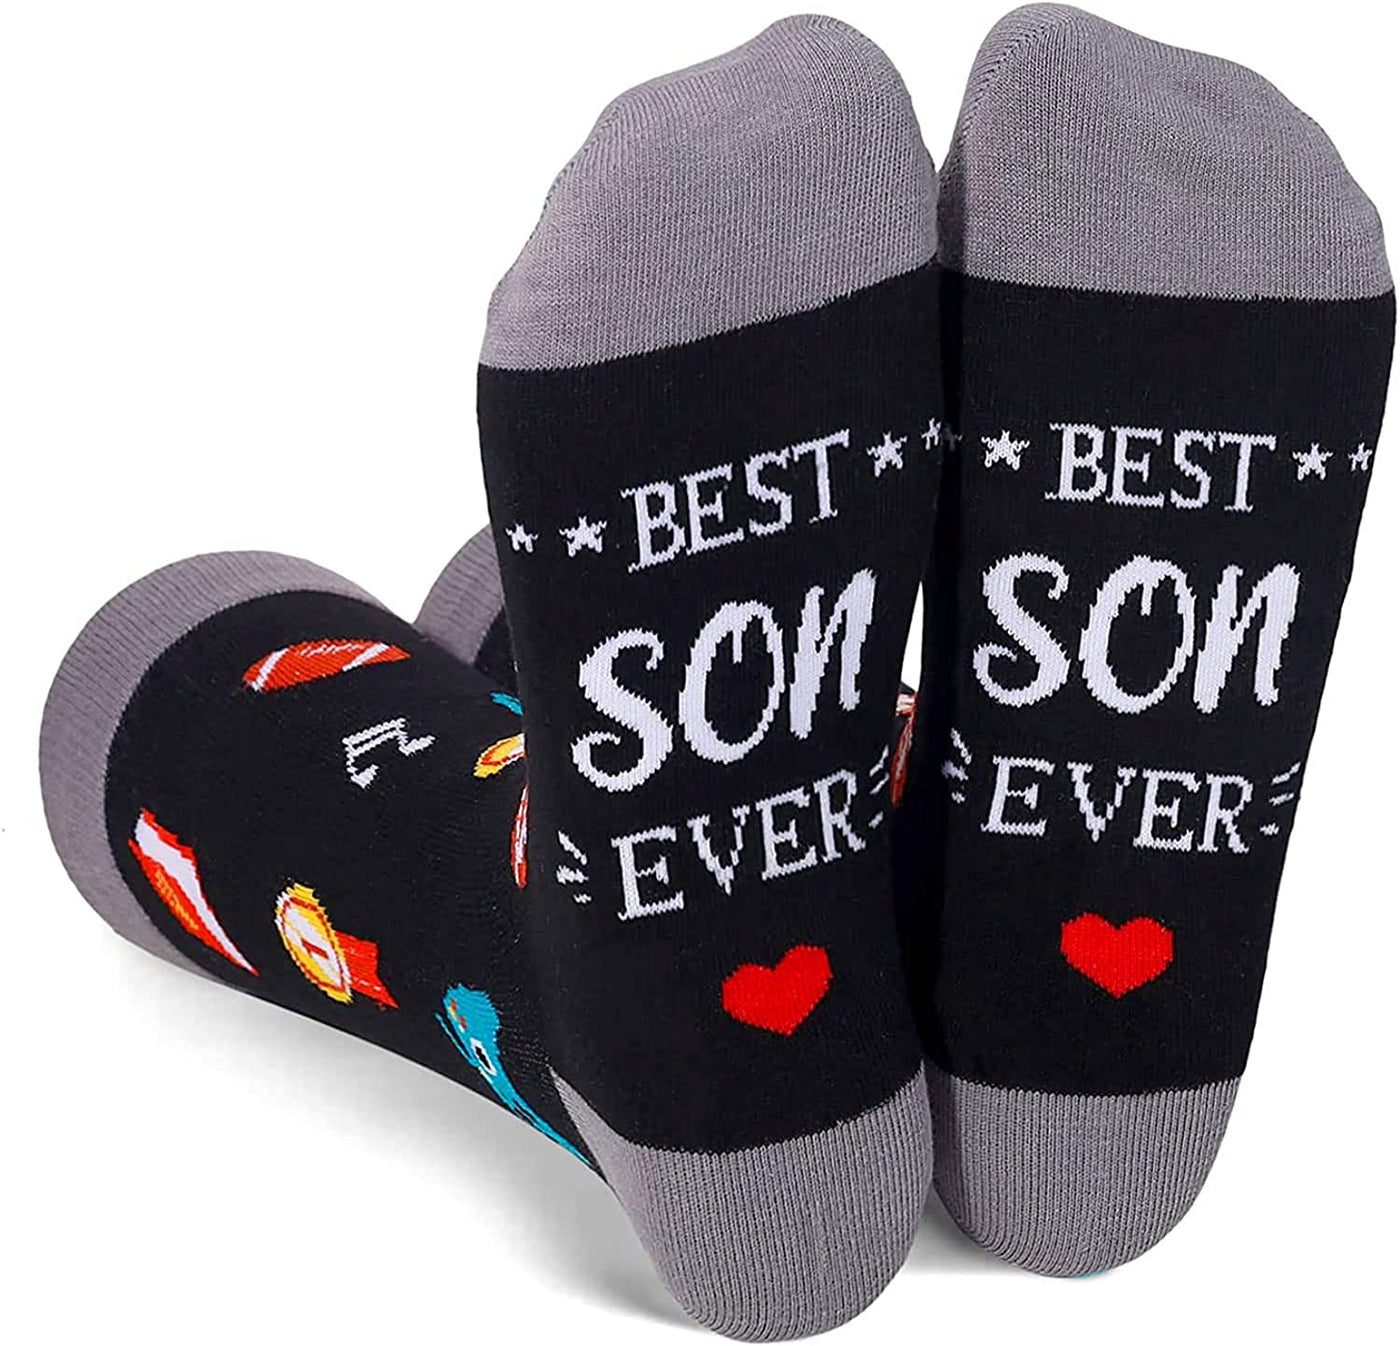  Funny Men Socks for Uncle Son Husband Brother Father in Law, Gifts for Son Husband Brother Father in Law